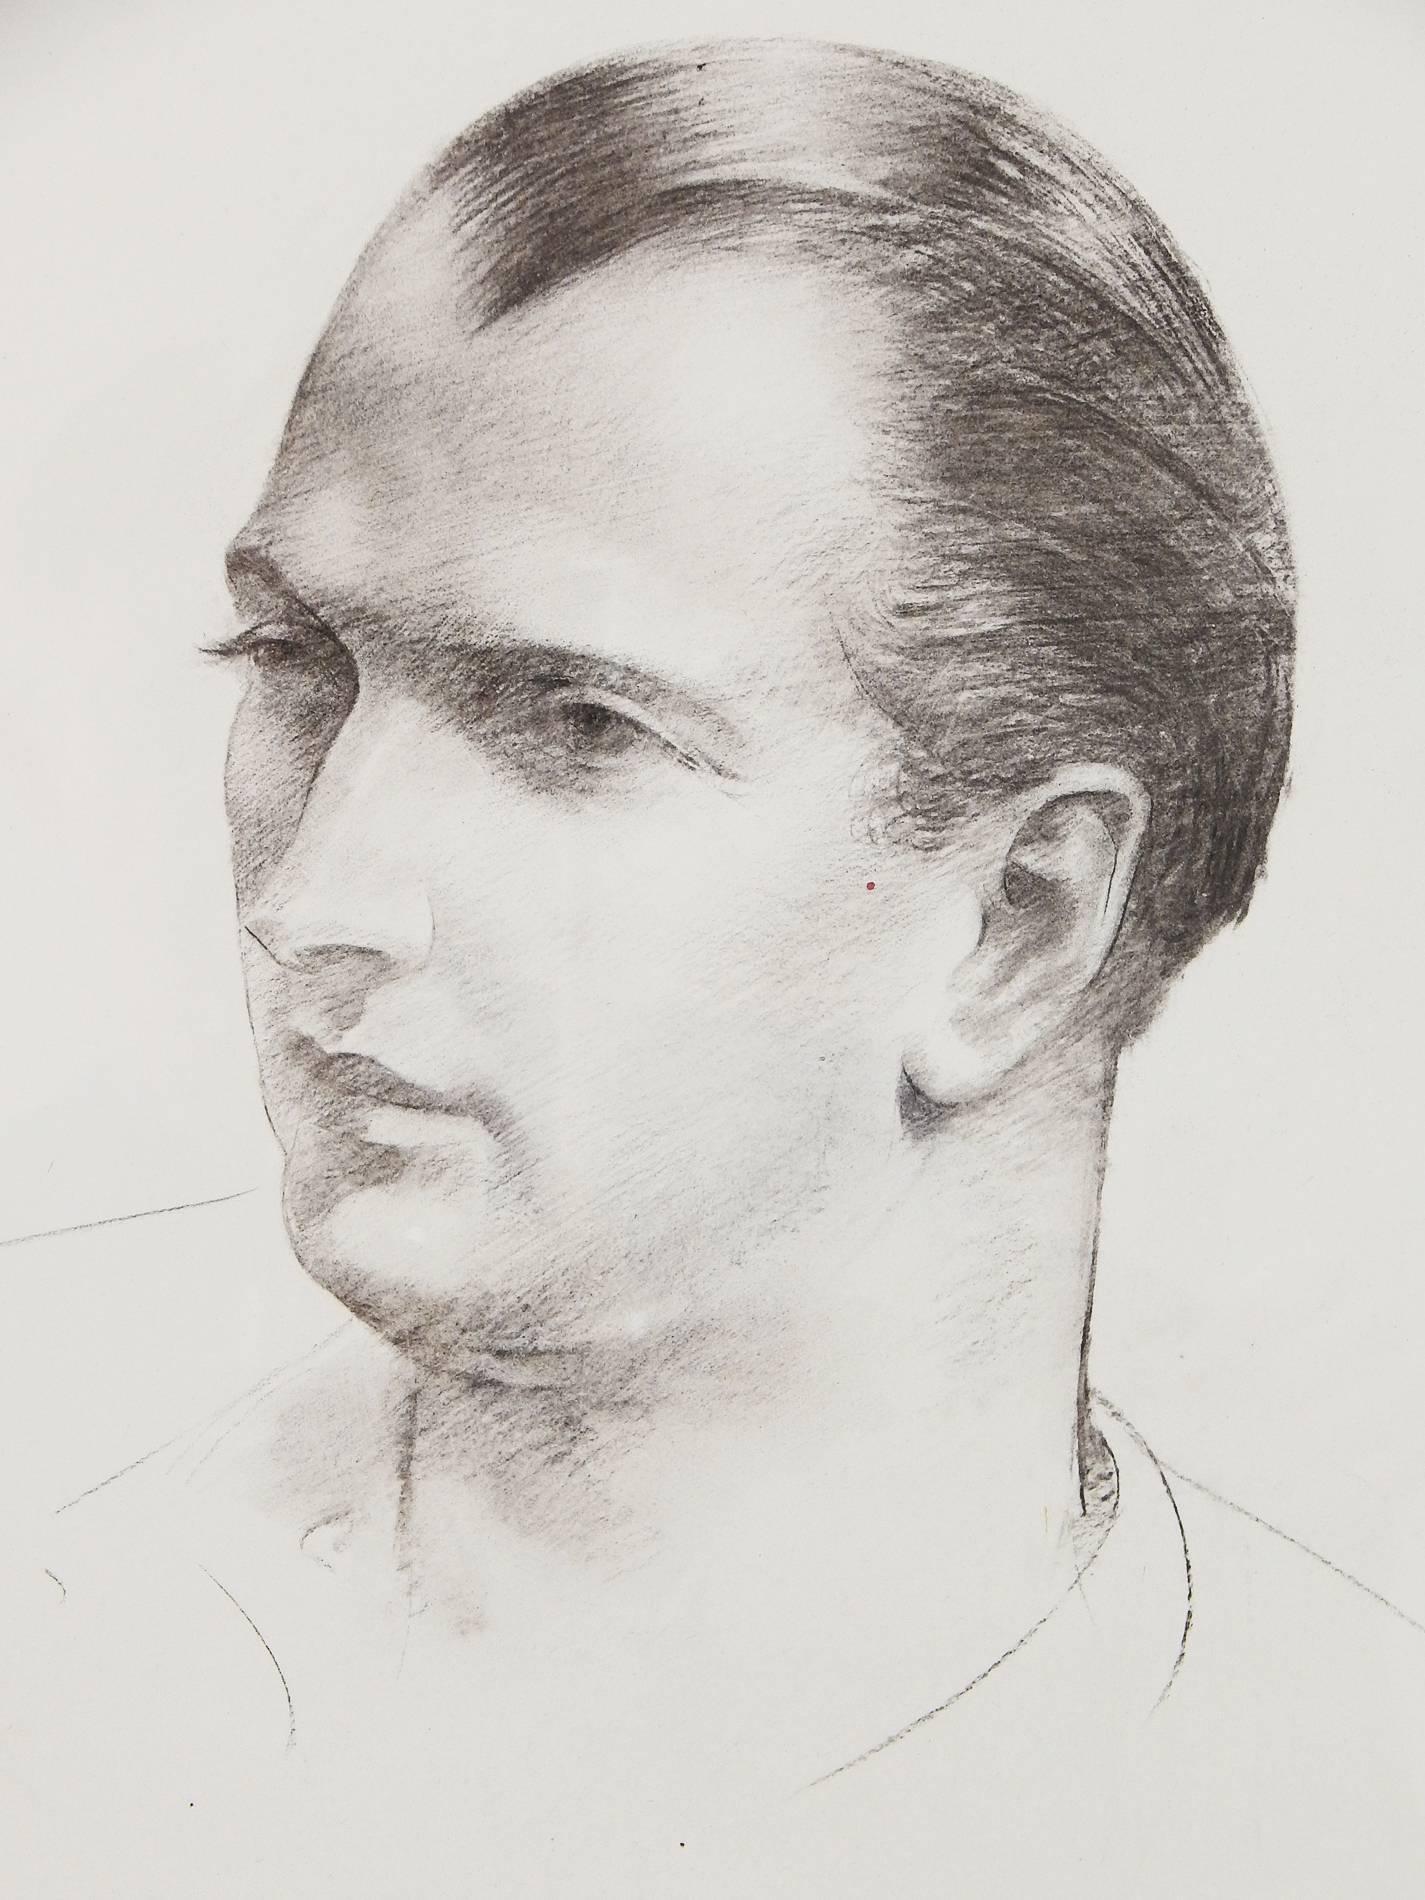 This strong and compelling portrait of a young man with chiselled features was drawn by Leon Kroll, WPA muralist and accomplished painter who normally favoured female subjects. Kroll studied under John Twachtman in New York and Jean-Paul Laurens in